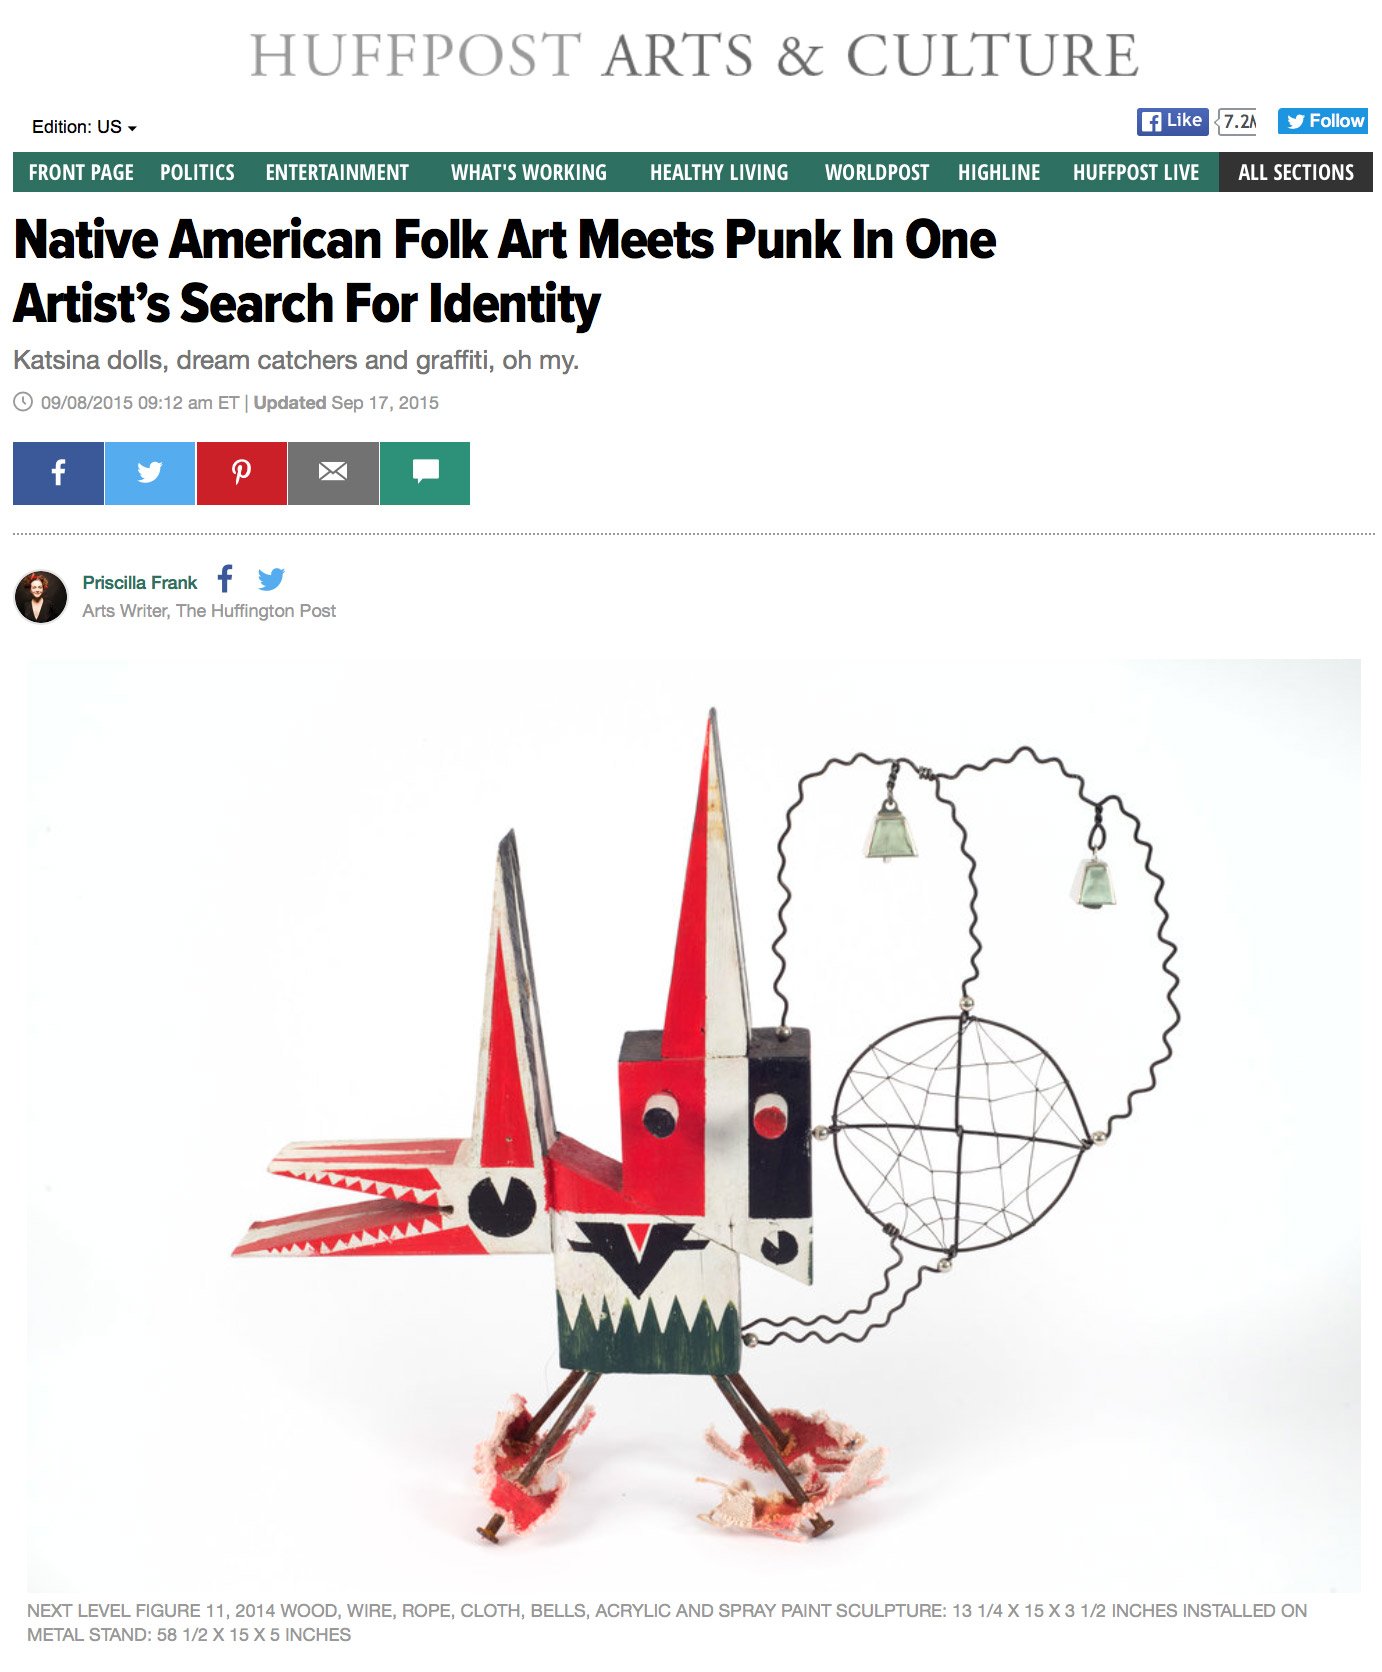 Native American Folk Art Meets Punk In One Artist’s Search For Identity